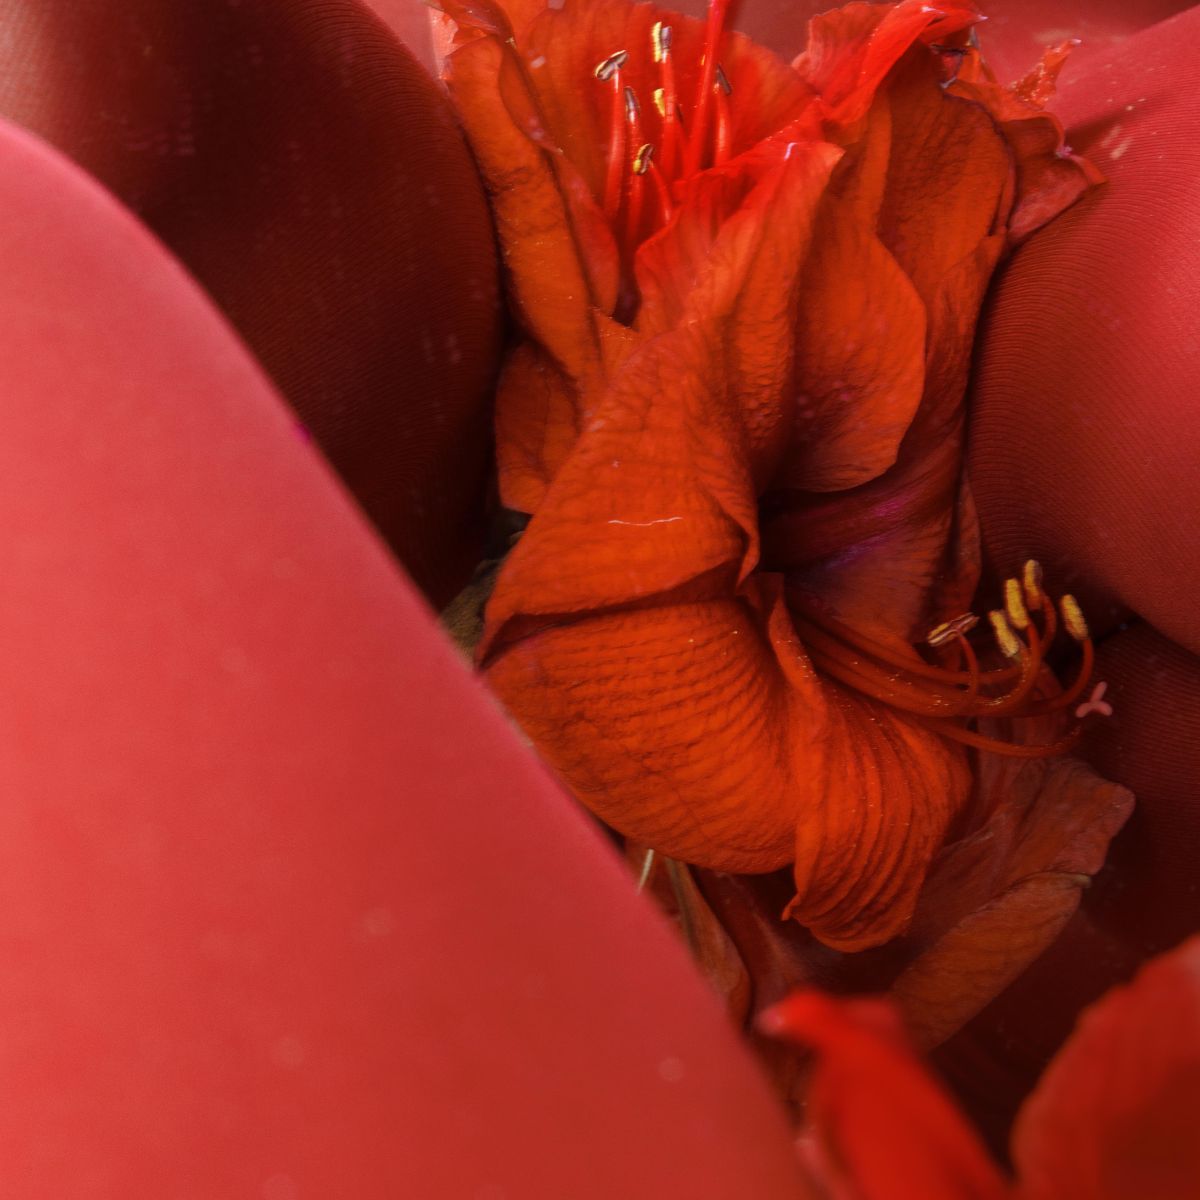 Human body flora photography by Alina Gross